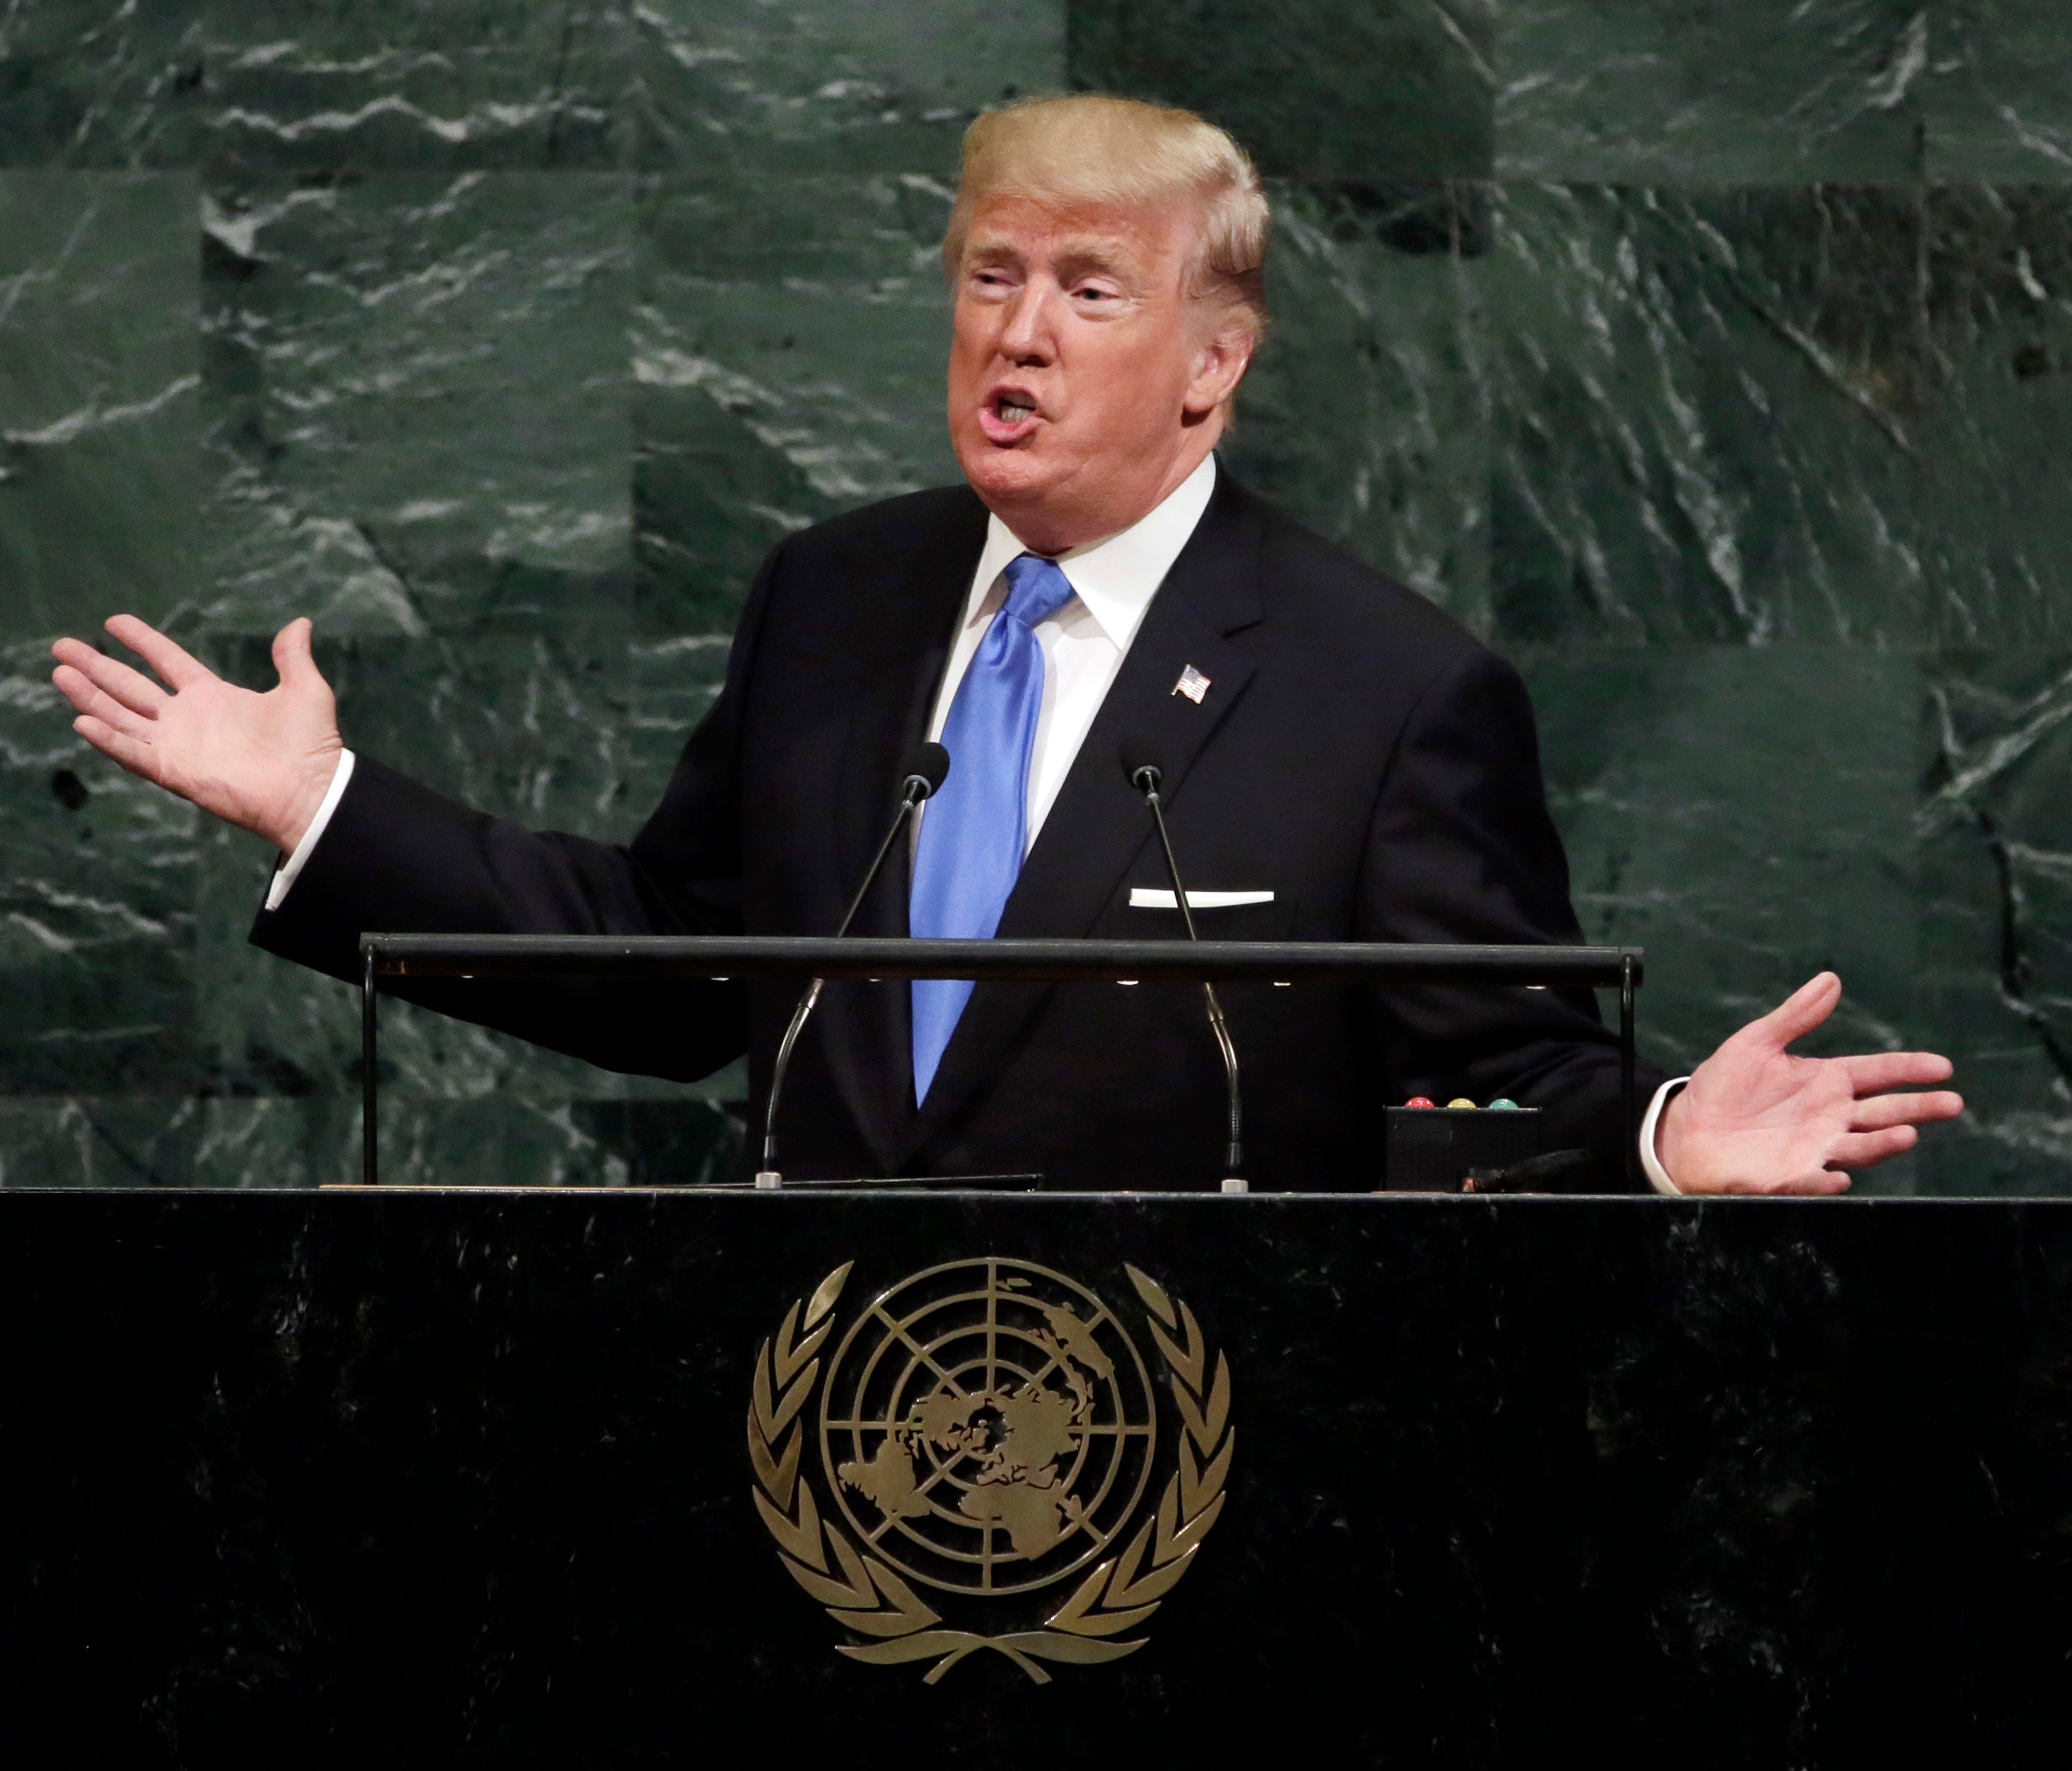 President Trump addresses the 72nd session of the United Nations General Assembly at U.N. headquarters on Sept. 19, 2017.